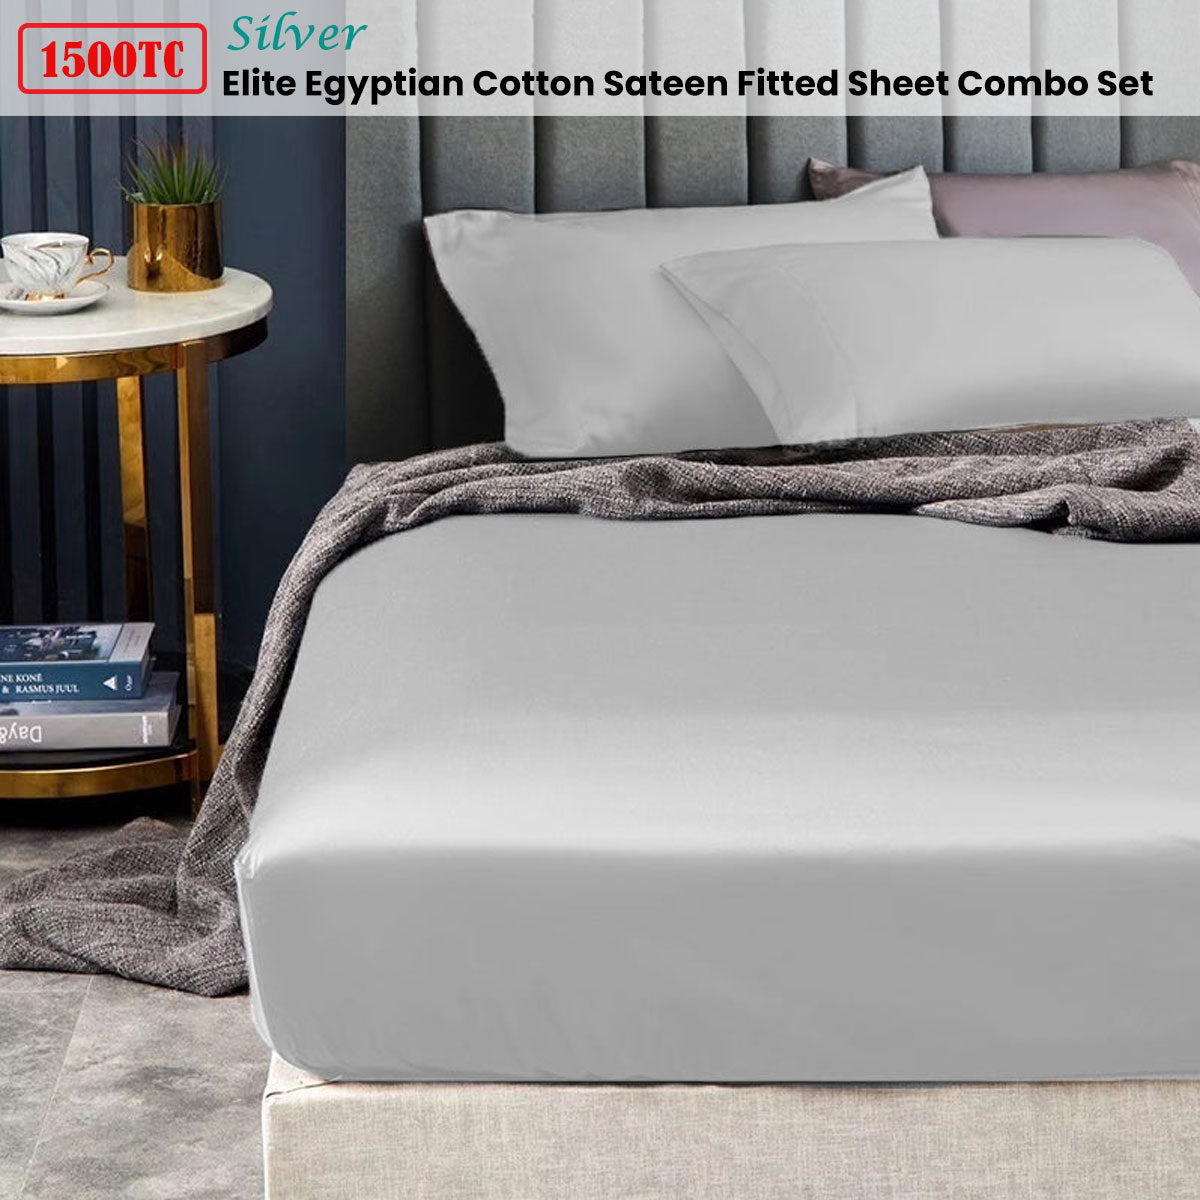 1500TC Elite Egyptian Cotton Sateen Fitted Sheet Combo Set Silver Queen